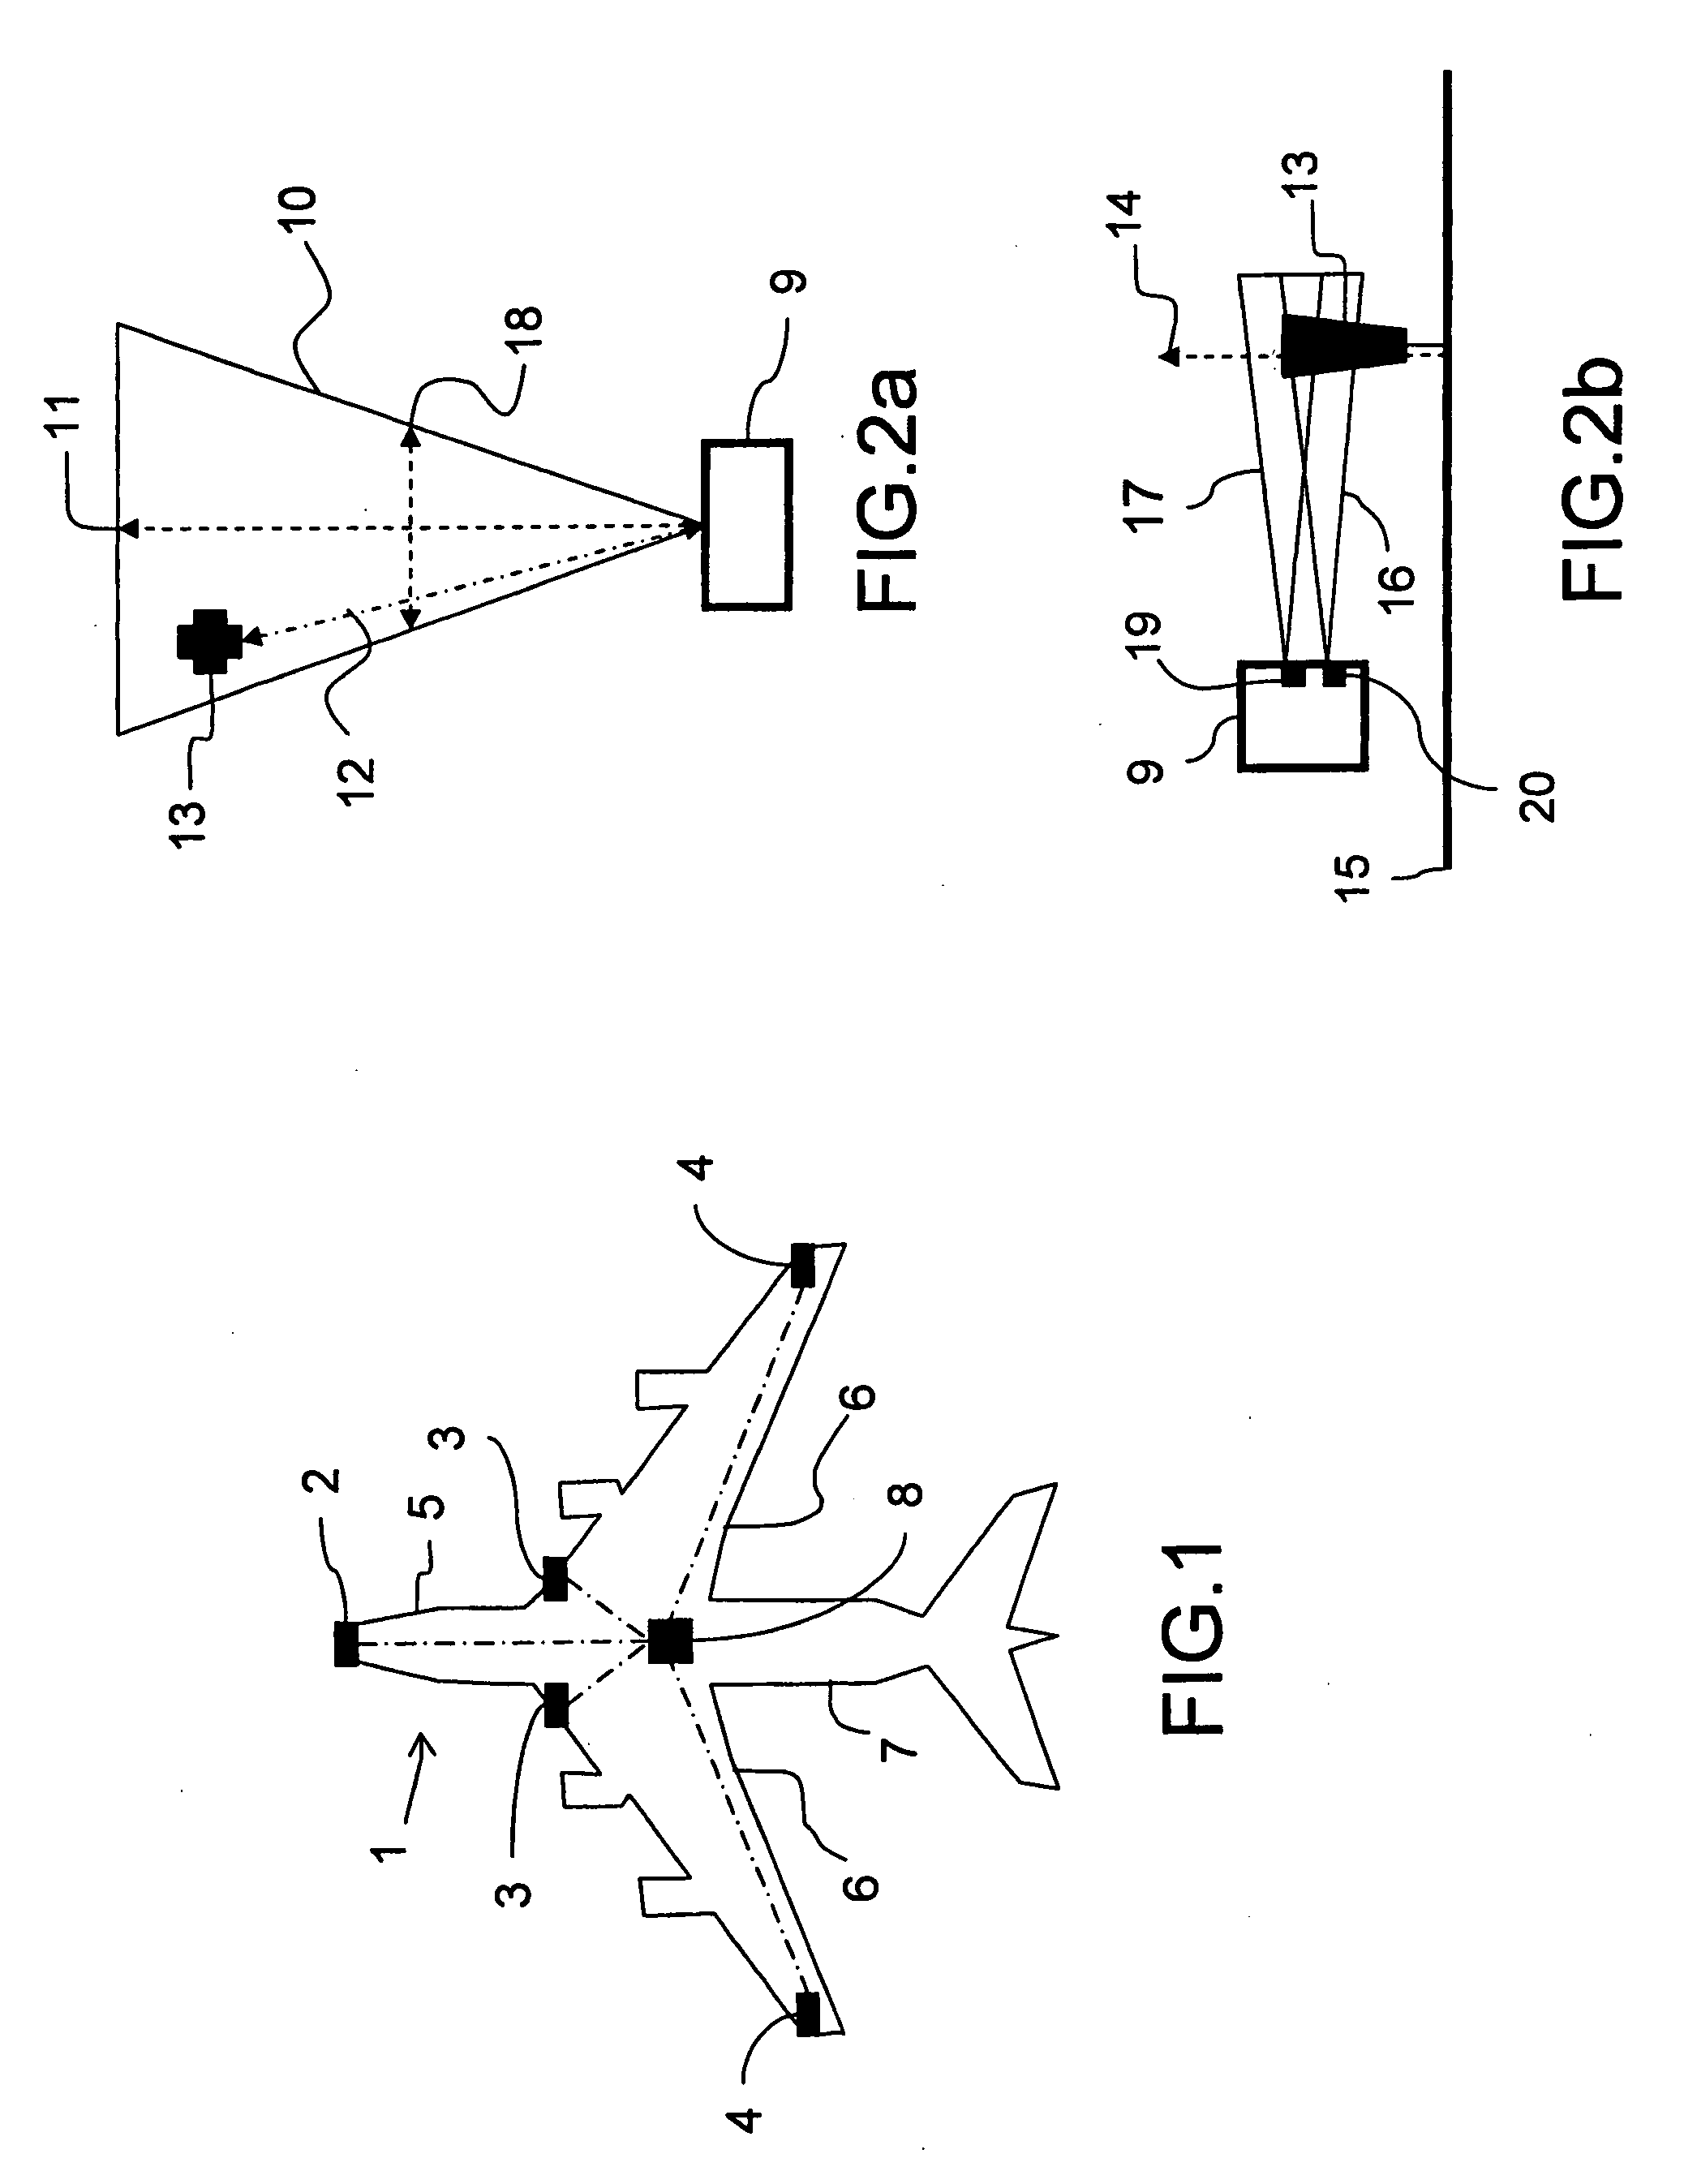 Obstacle detection system notably for an anticollision system